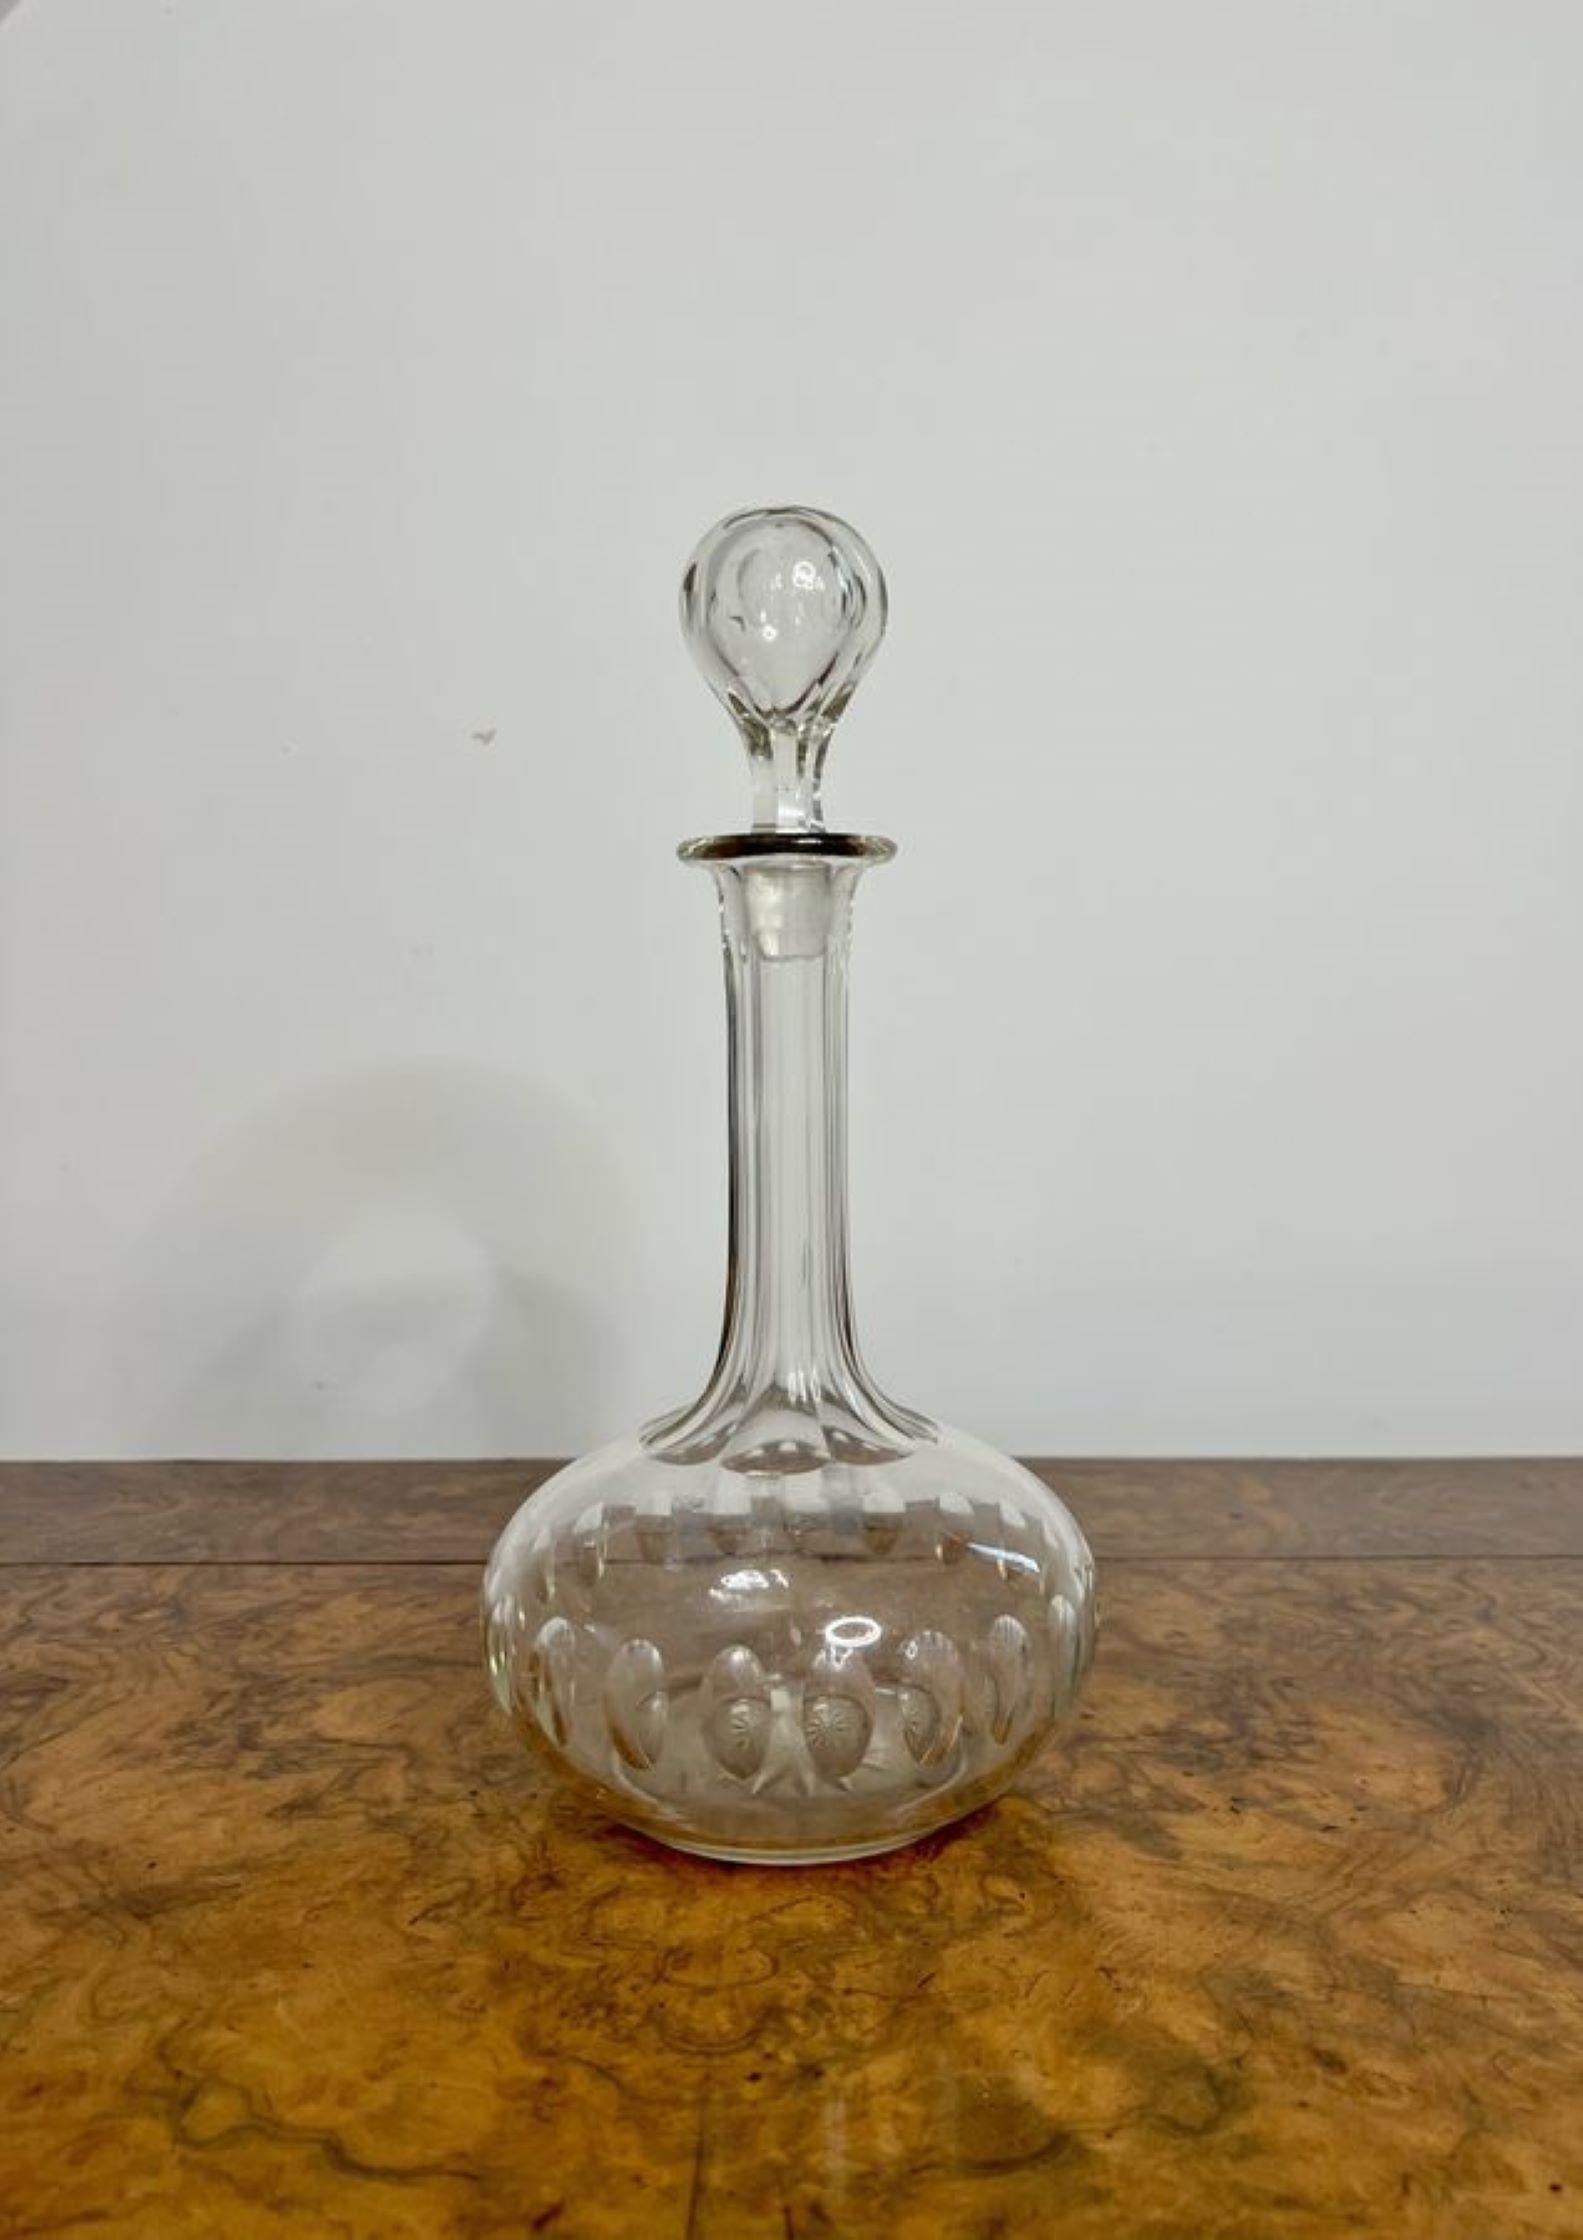 Stunning quality antique Victorian decanter having a quality decanter with the original glass stopper.

D. 1880